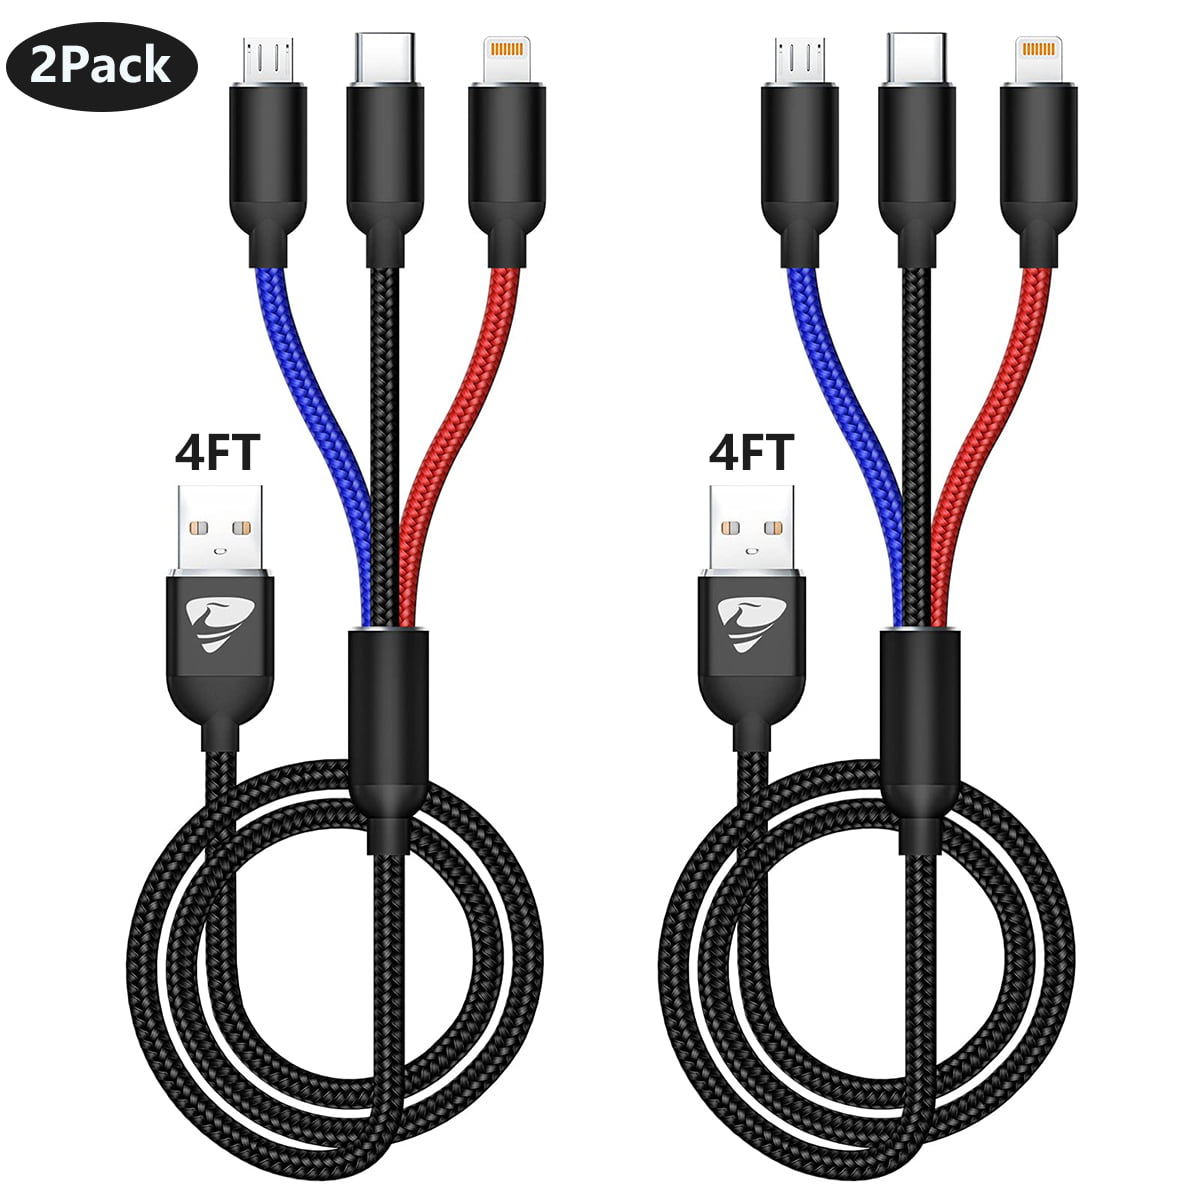 2Pack 4FT Multi Charging Cable, 3 in 1 Multi Charger Cable Nylon Braided Charging Cable Multi USB Cable Fast Charging Cord with Type C